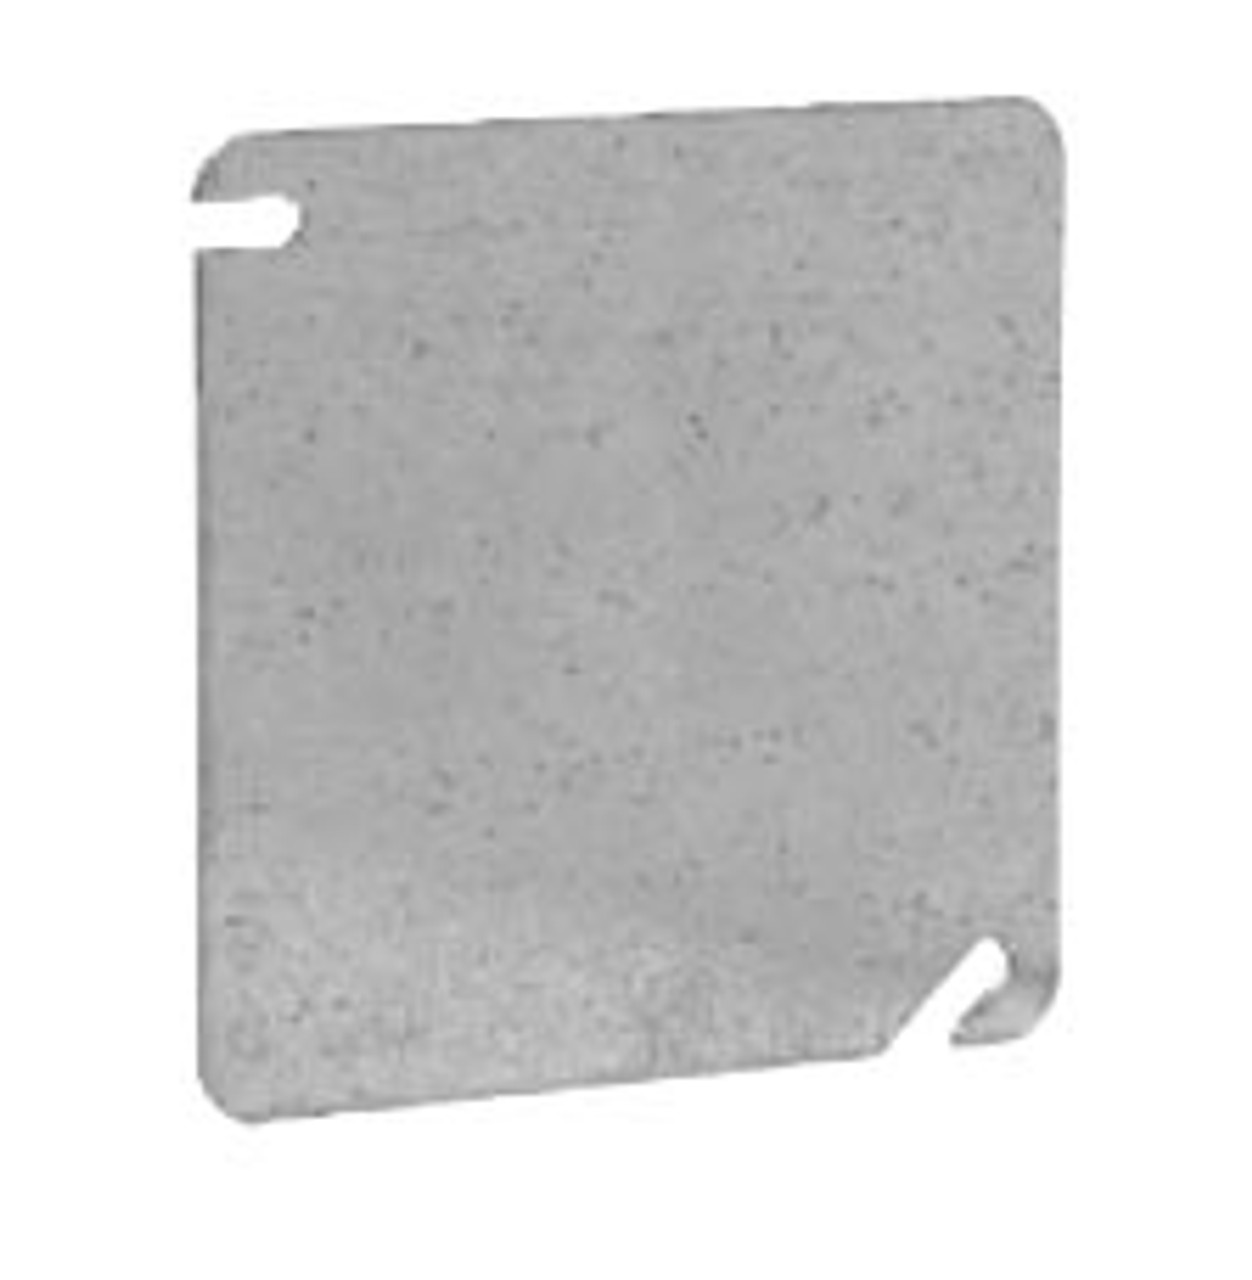 Crouse-Hinds TP472 - Square Flat Blank Box Cover